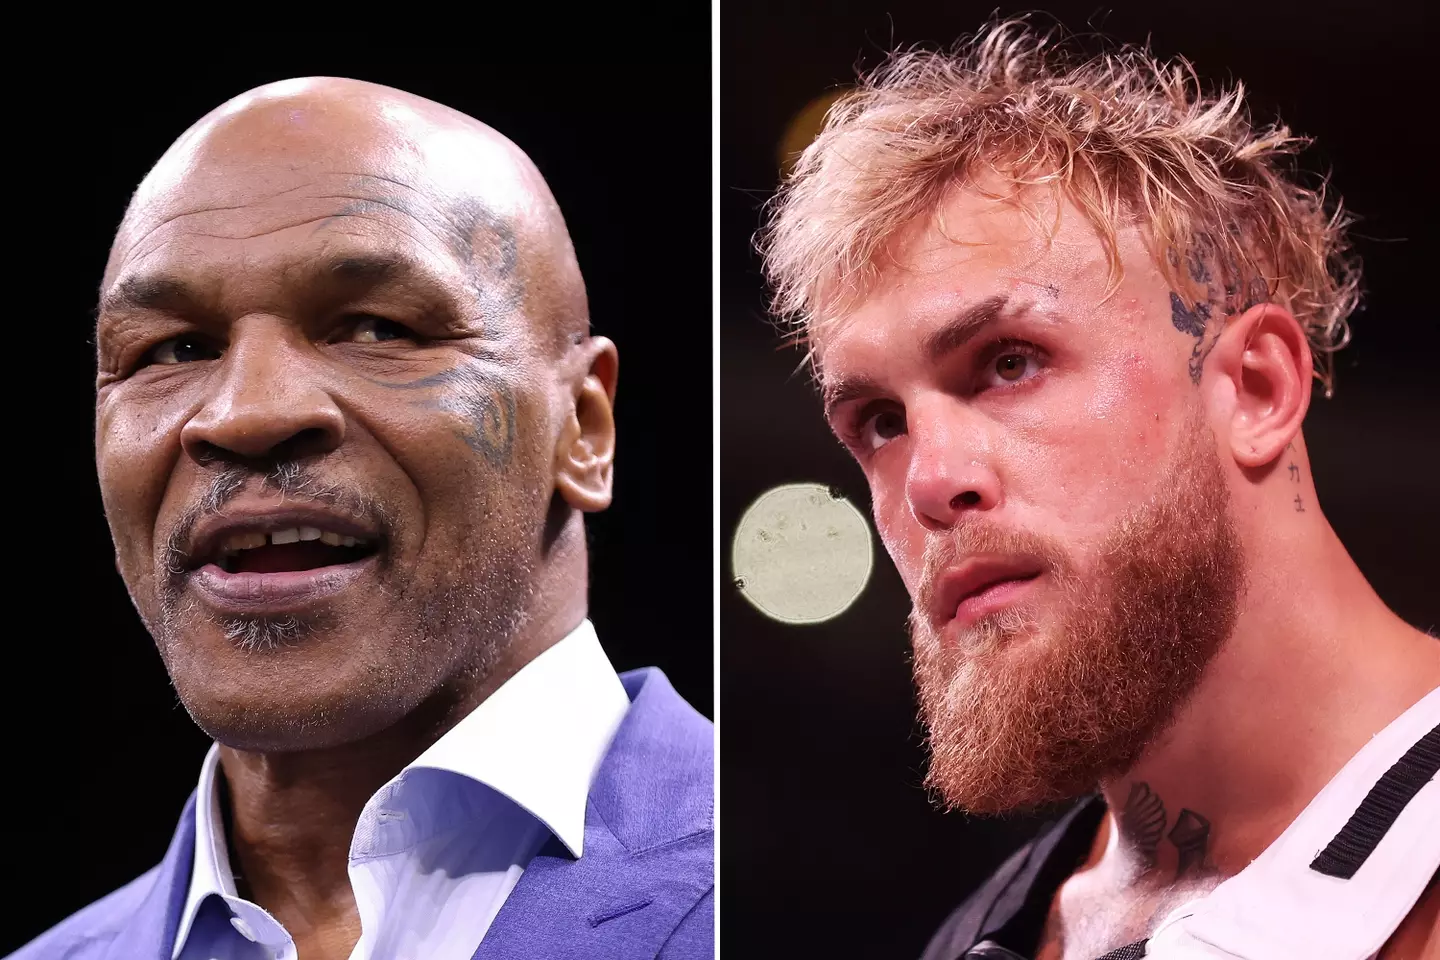 Jake Paul will face Mike Tyson later this year. (